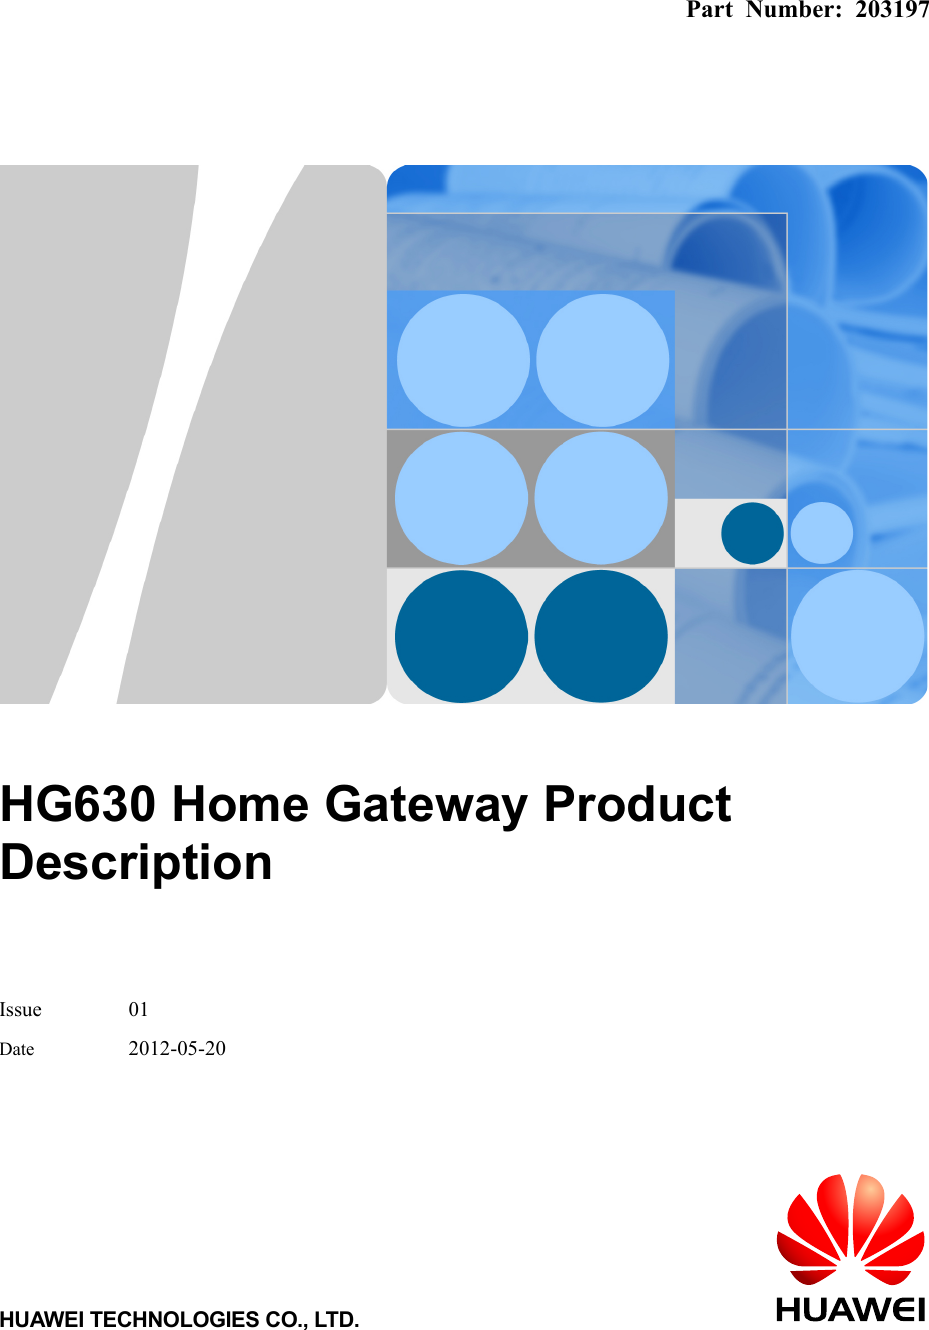    Part Number: 203197     HG630 Home Gateway Product Description    Issue 01 Date 2012-05-20 HUAWEI TECHNOLOGIES CO., LTD.  